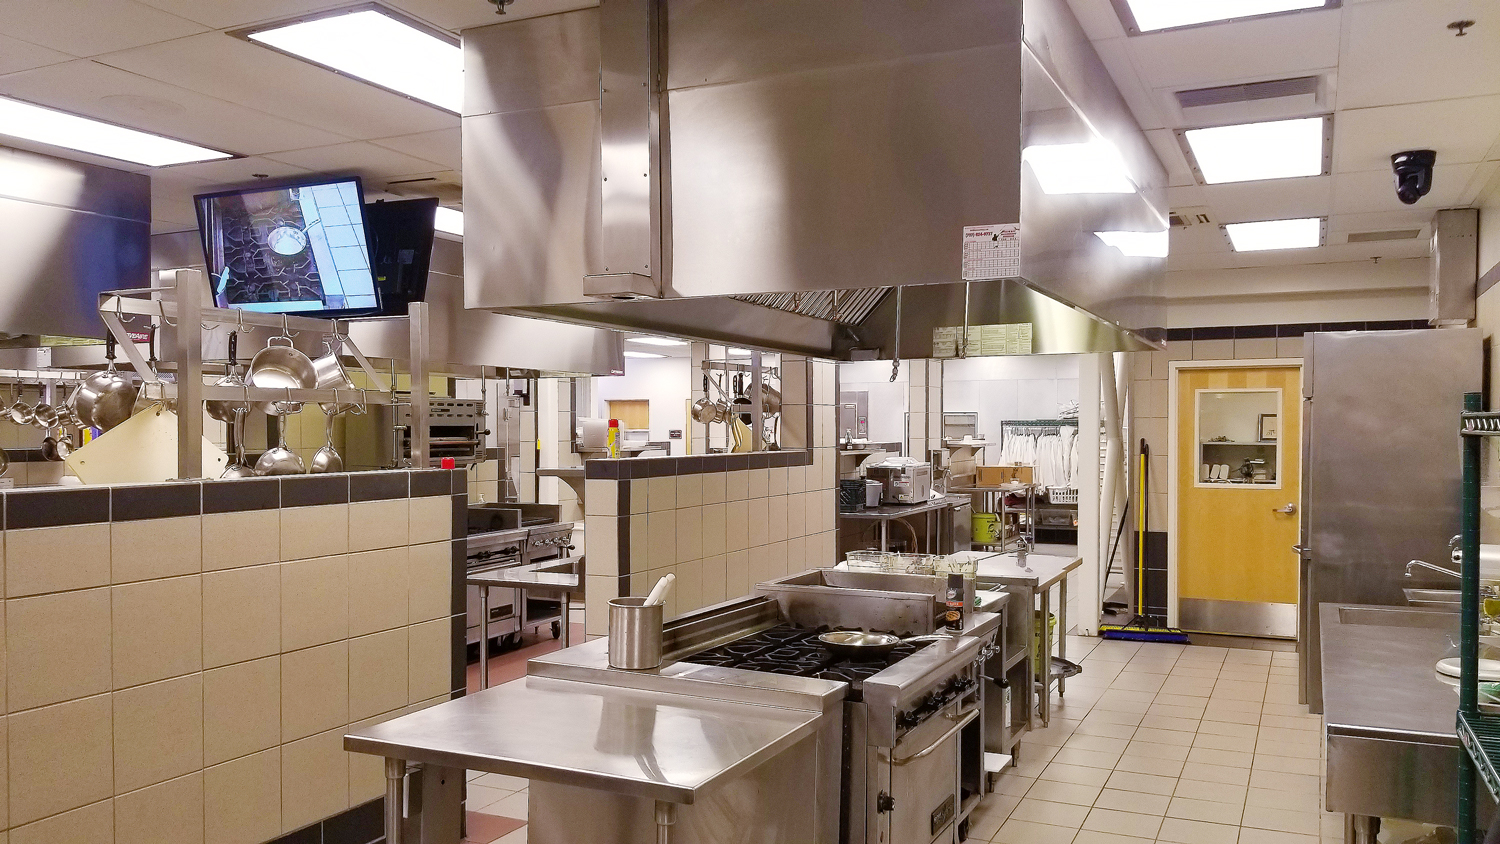 St. Helena High School offers a number of programs that prepare students for careers in hospitality and specifically the culinary arts.